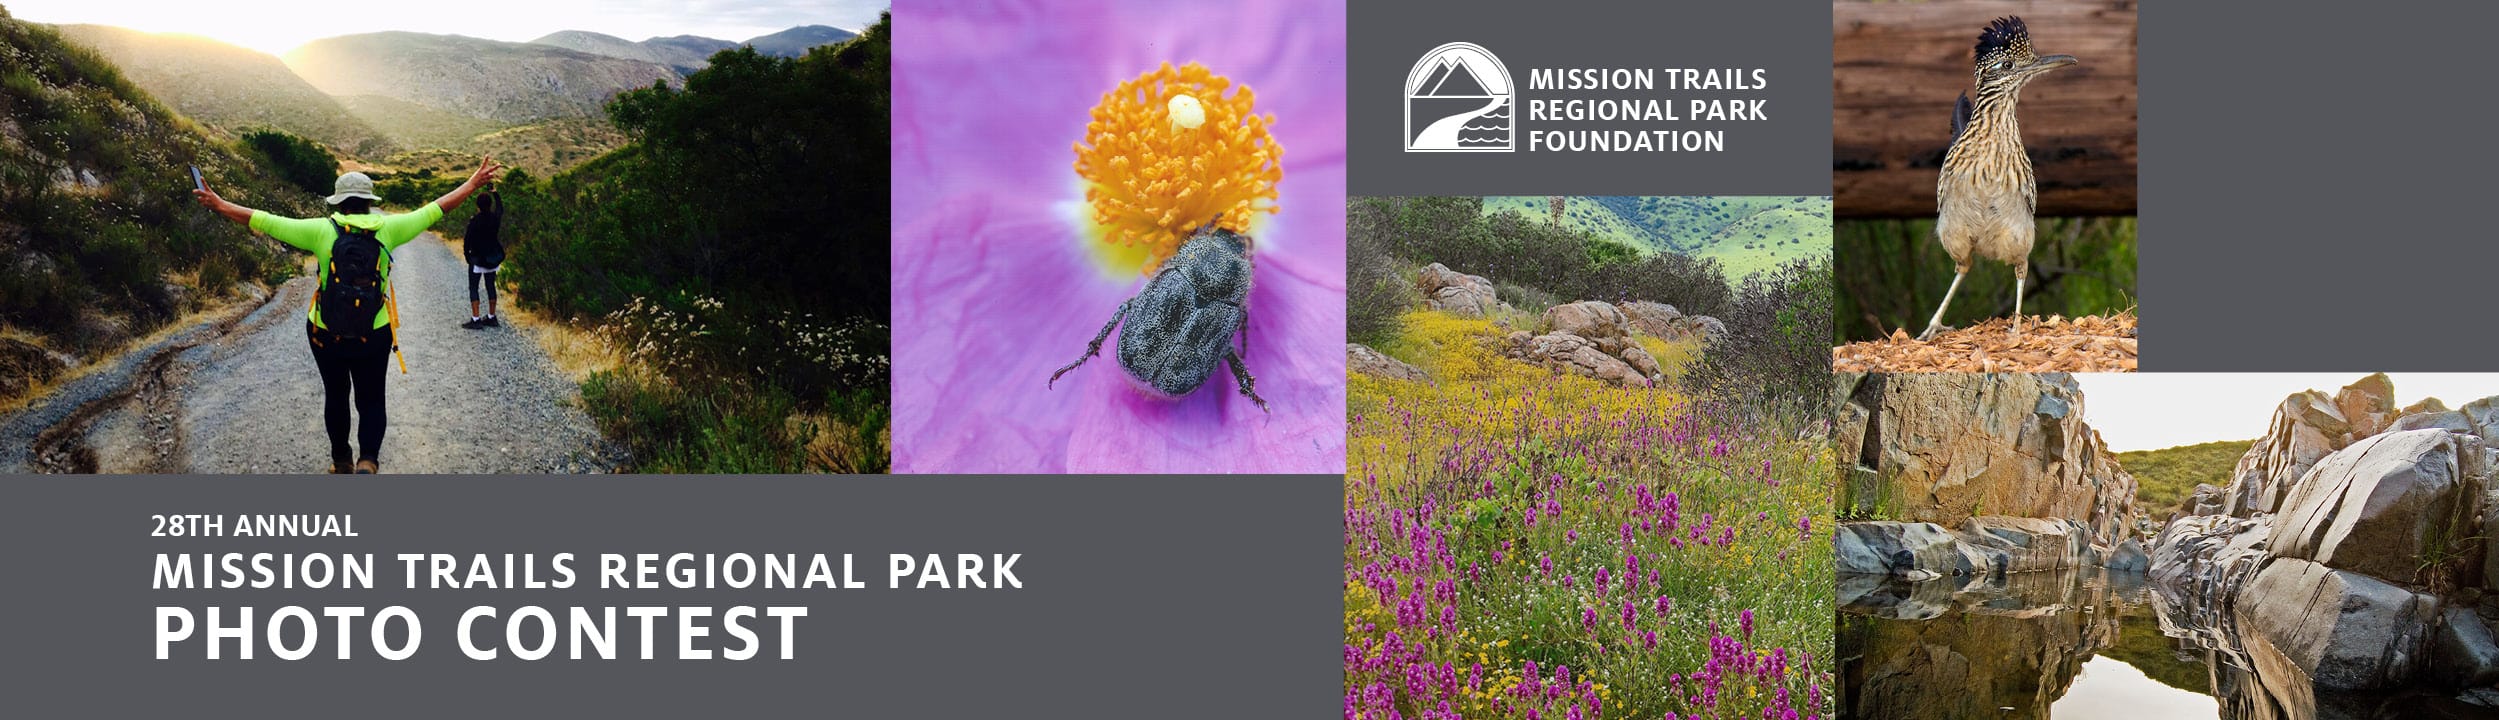 28th Annual Mission Trails Regional Park Photo Contest